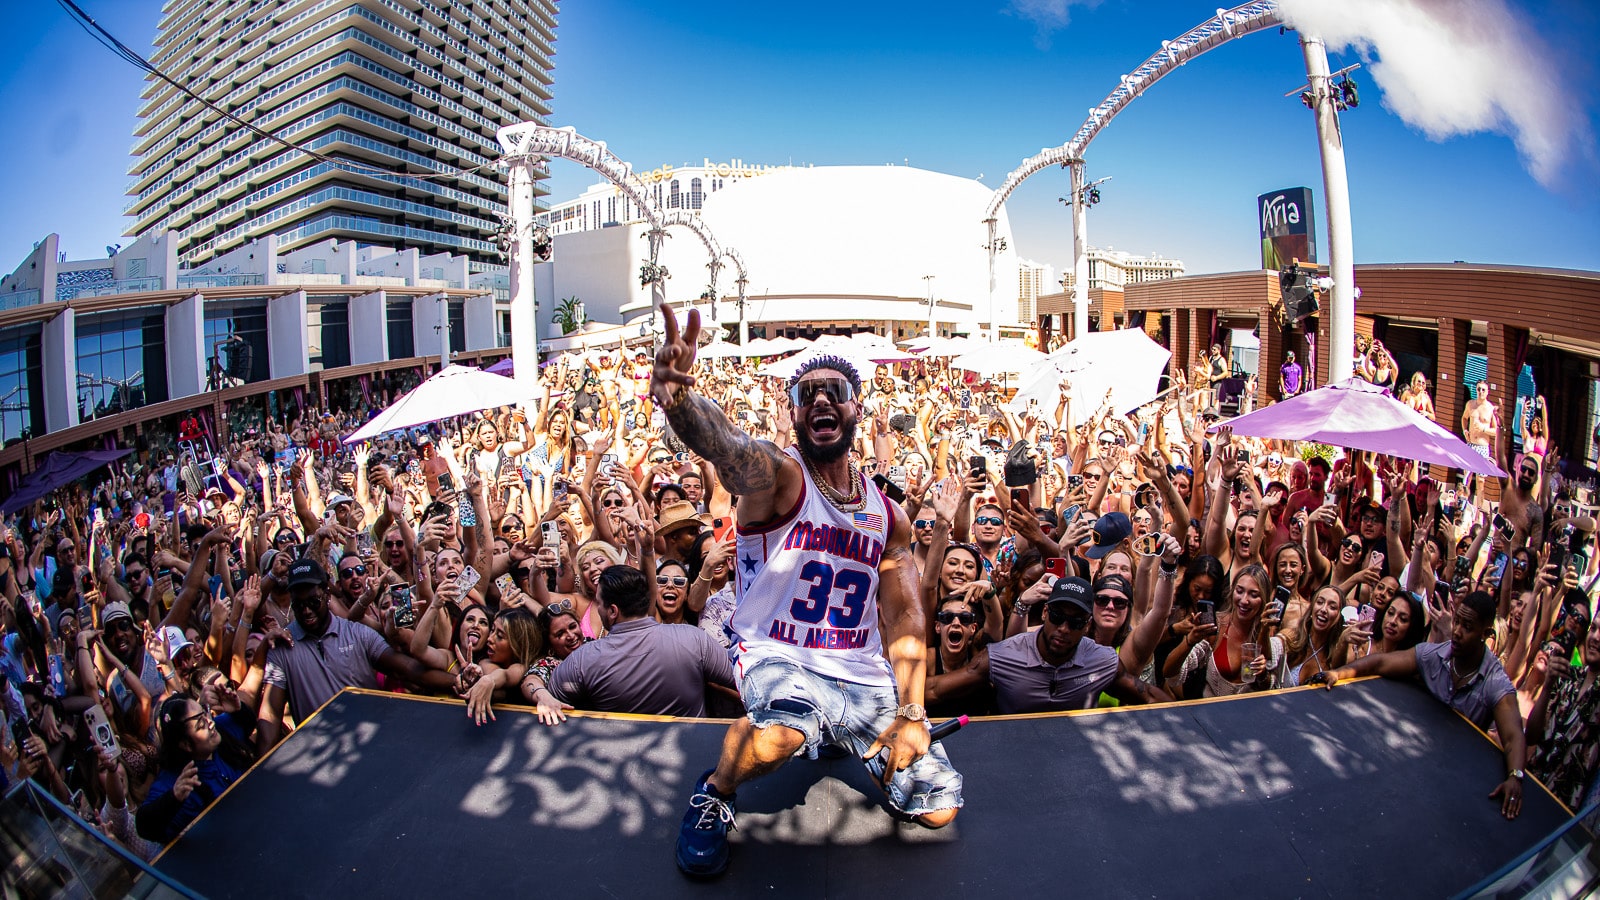 Marquee Dayclub at Cosmopolitan